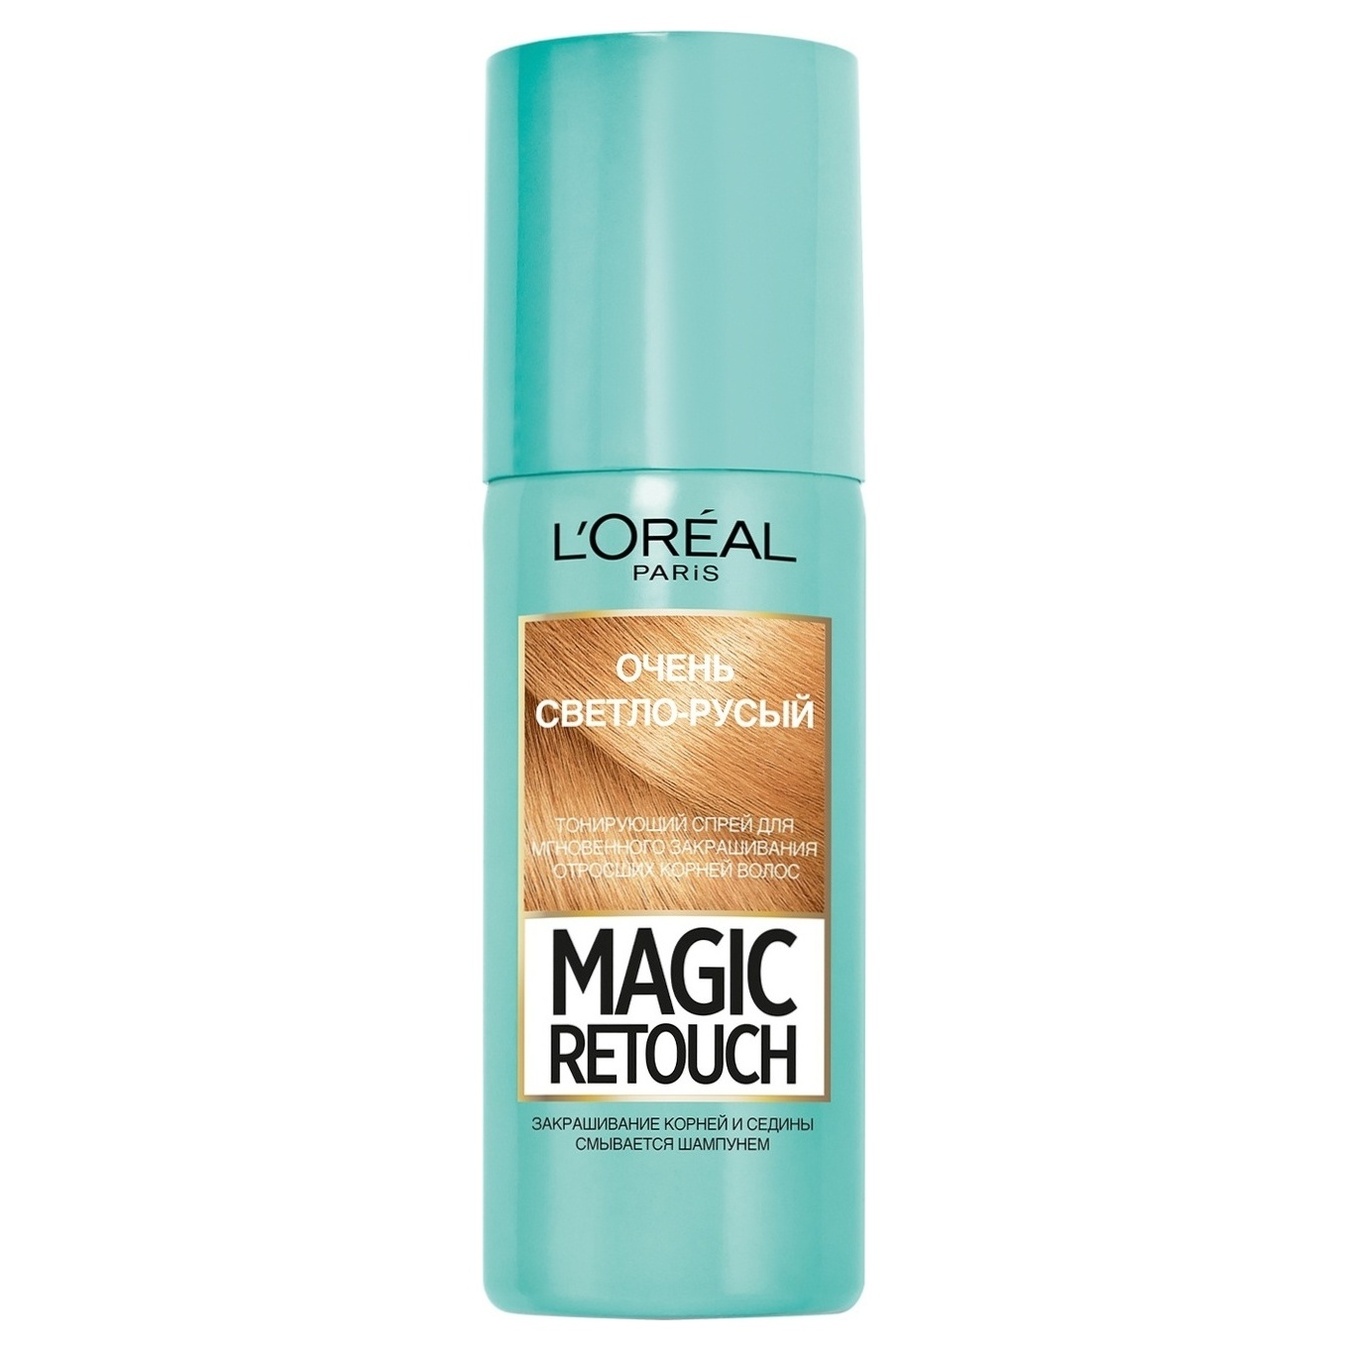 Magic retouch spray for instant masking of gray roots of very light blond hair 75 ml